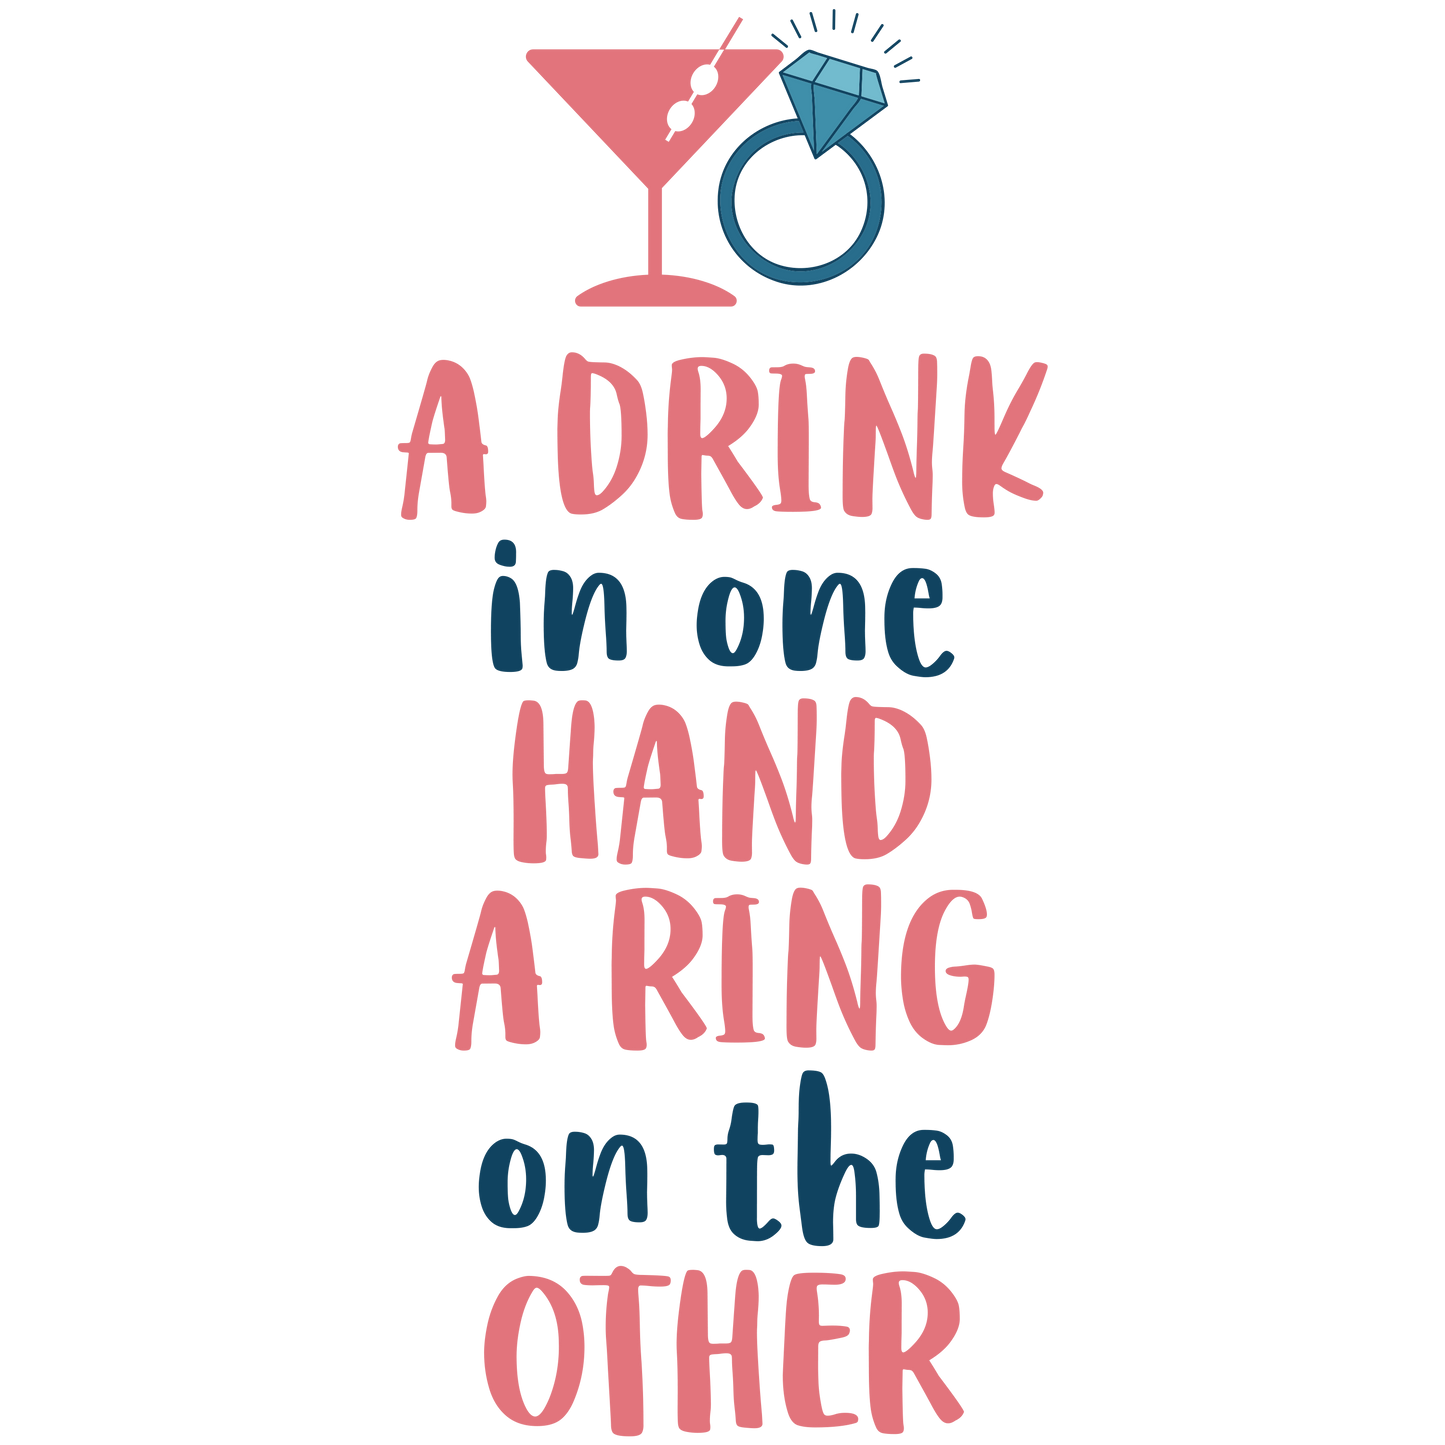 DRINK IN ONE HAND, RING ON THE OTHER